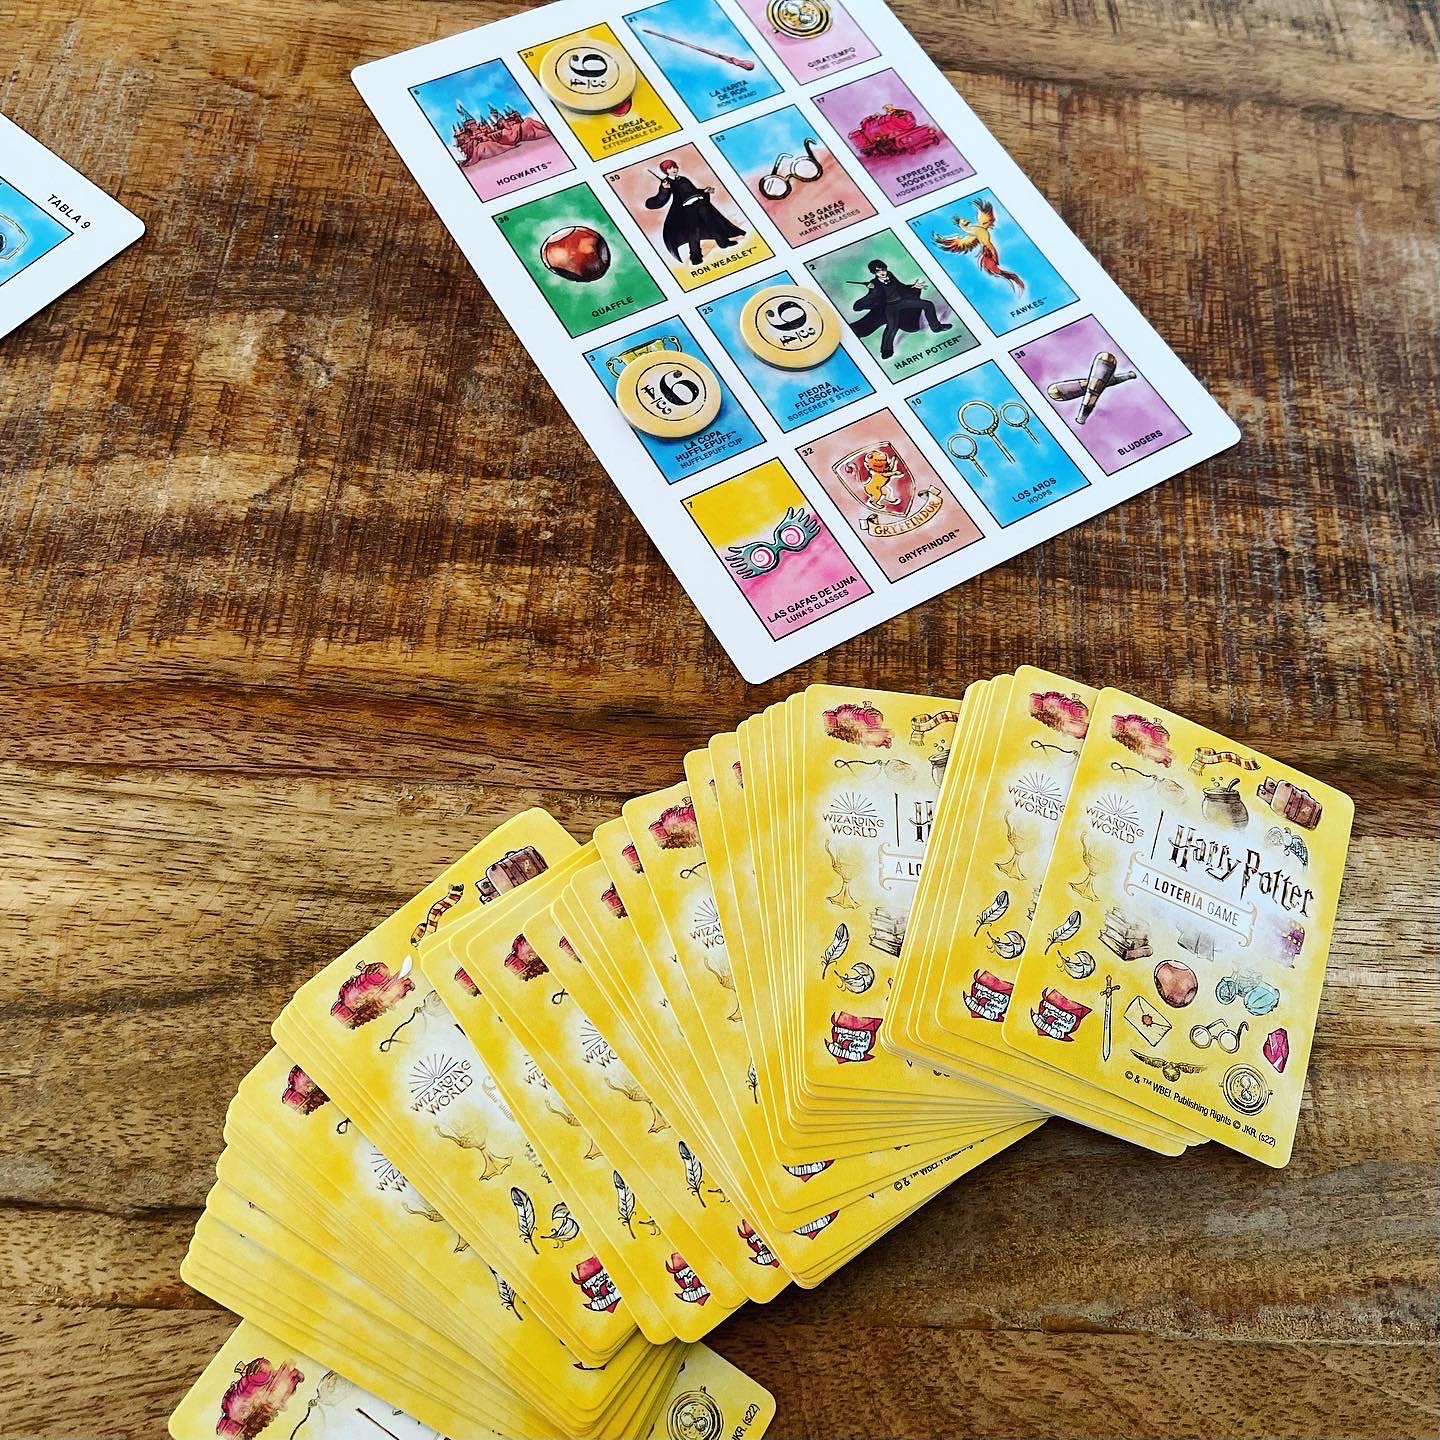 Review: Harry Potter Loteria (The Op)